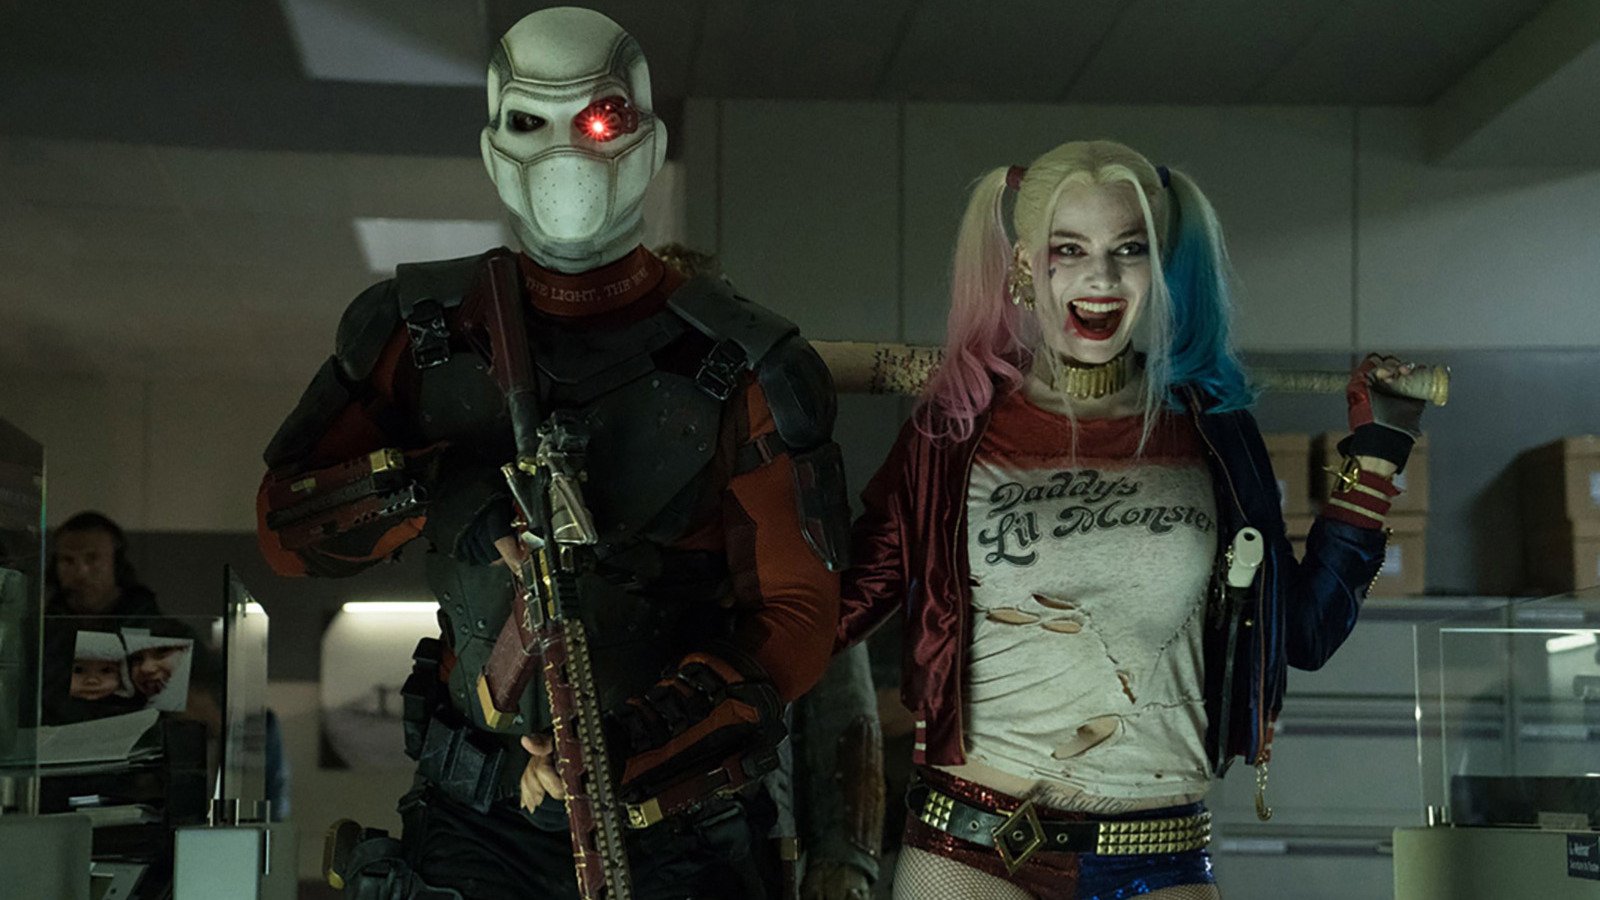 Why Was There An Online Controversy Over Harley Quinn's Shorts In Suicide Squad?